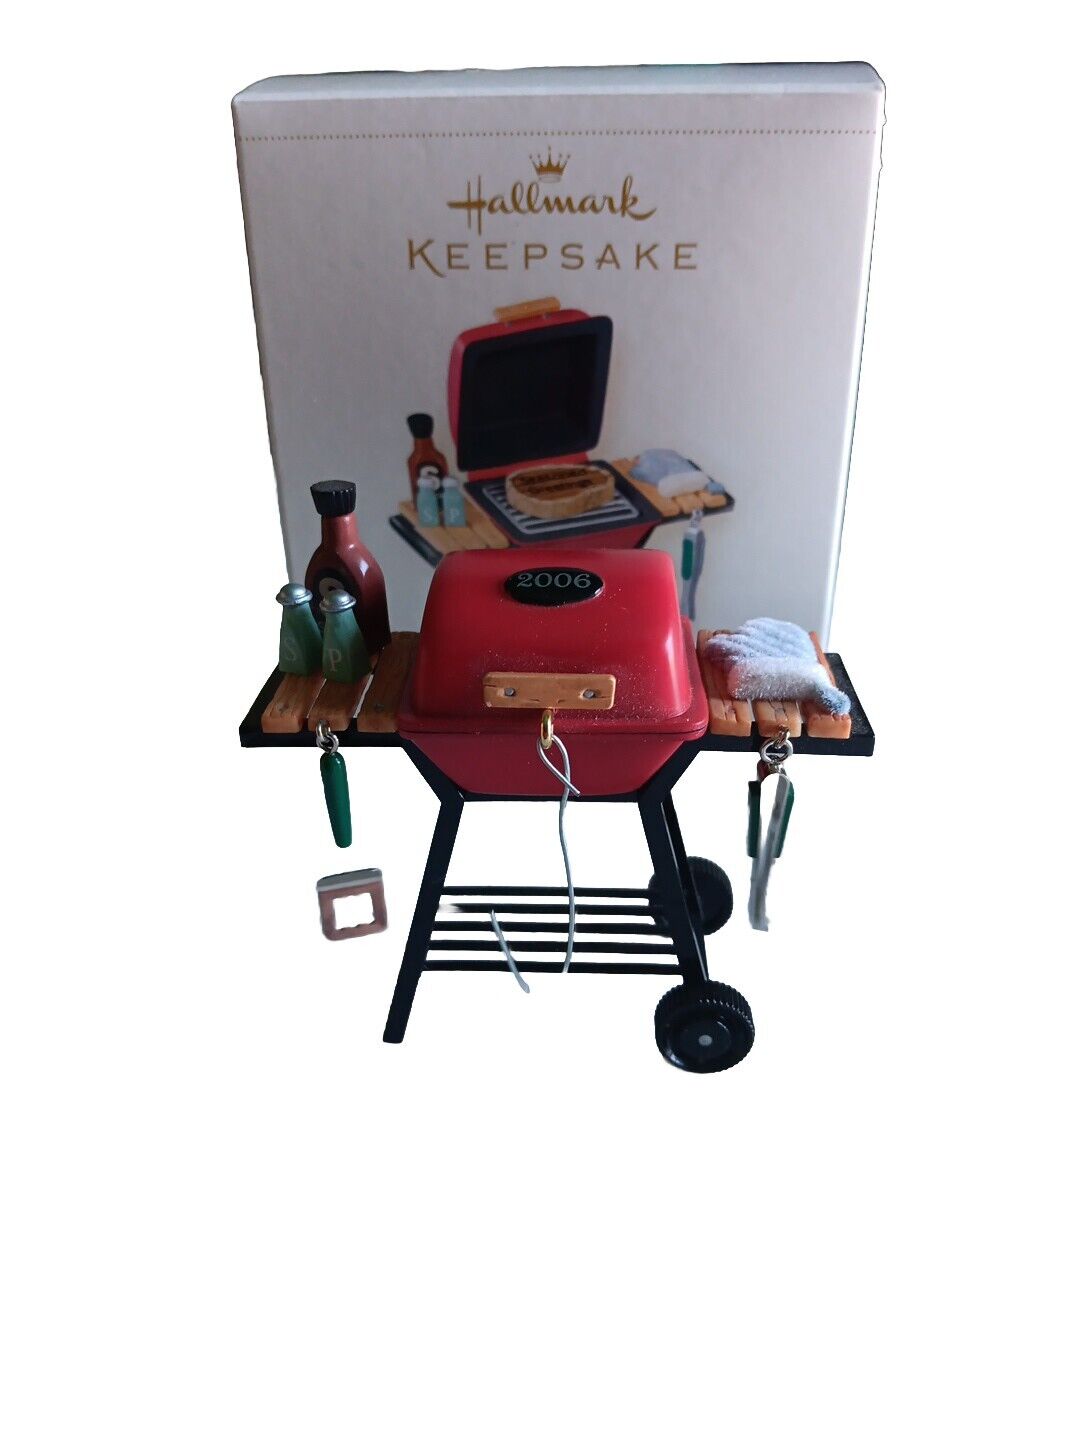 Hallmark Keepsake Ornament 2006 Oh What A Grill Christmas Ornament Great For RV